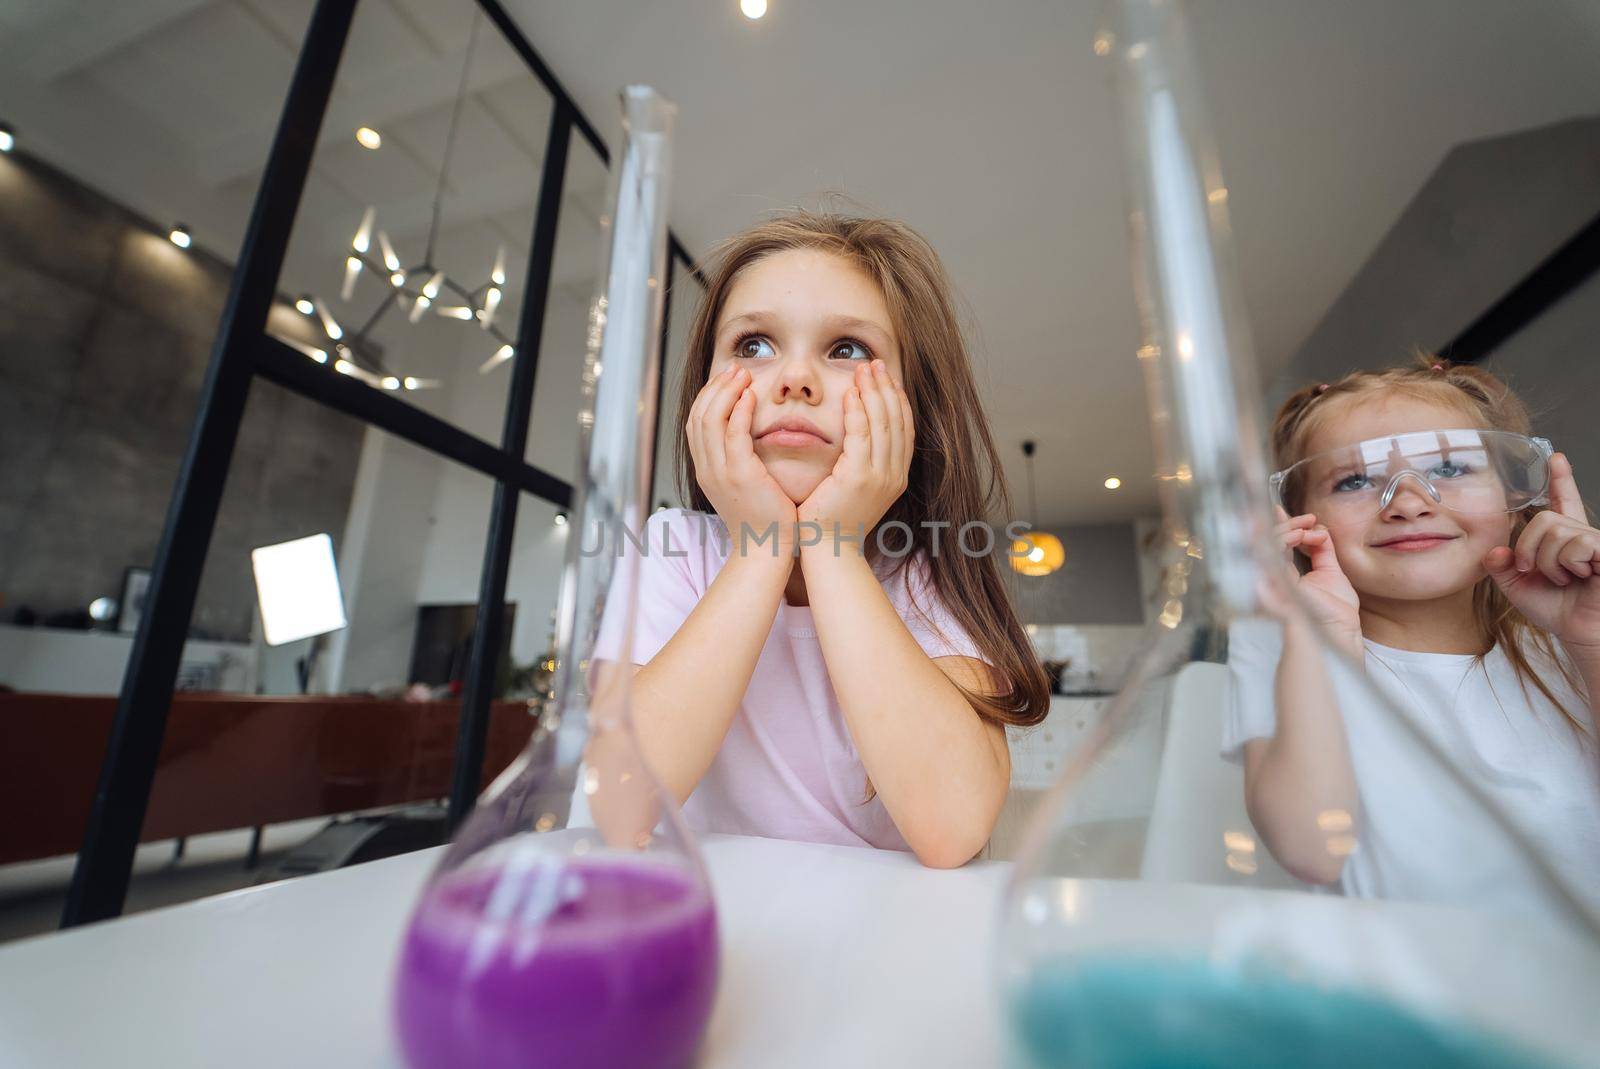 Girls making chemical experiments at home, close view.